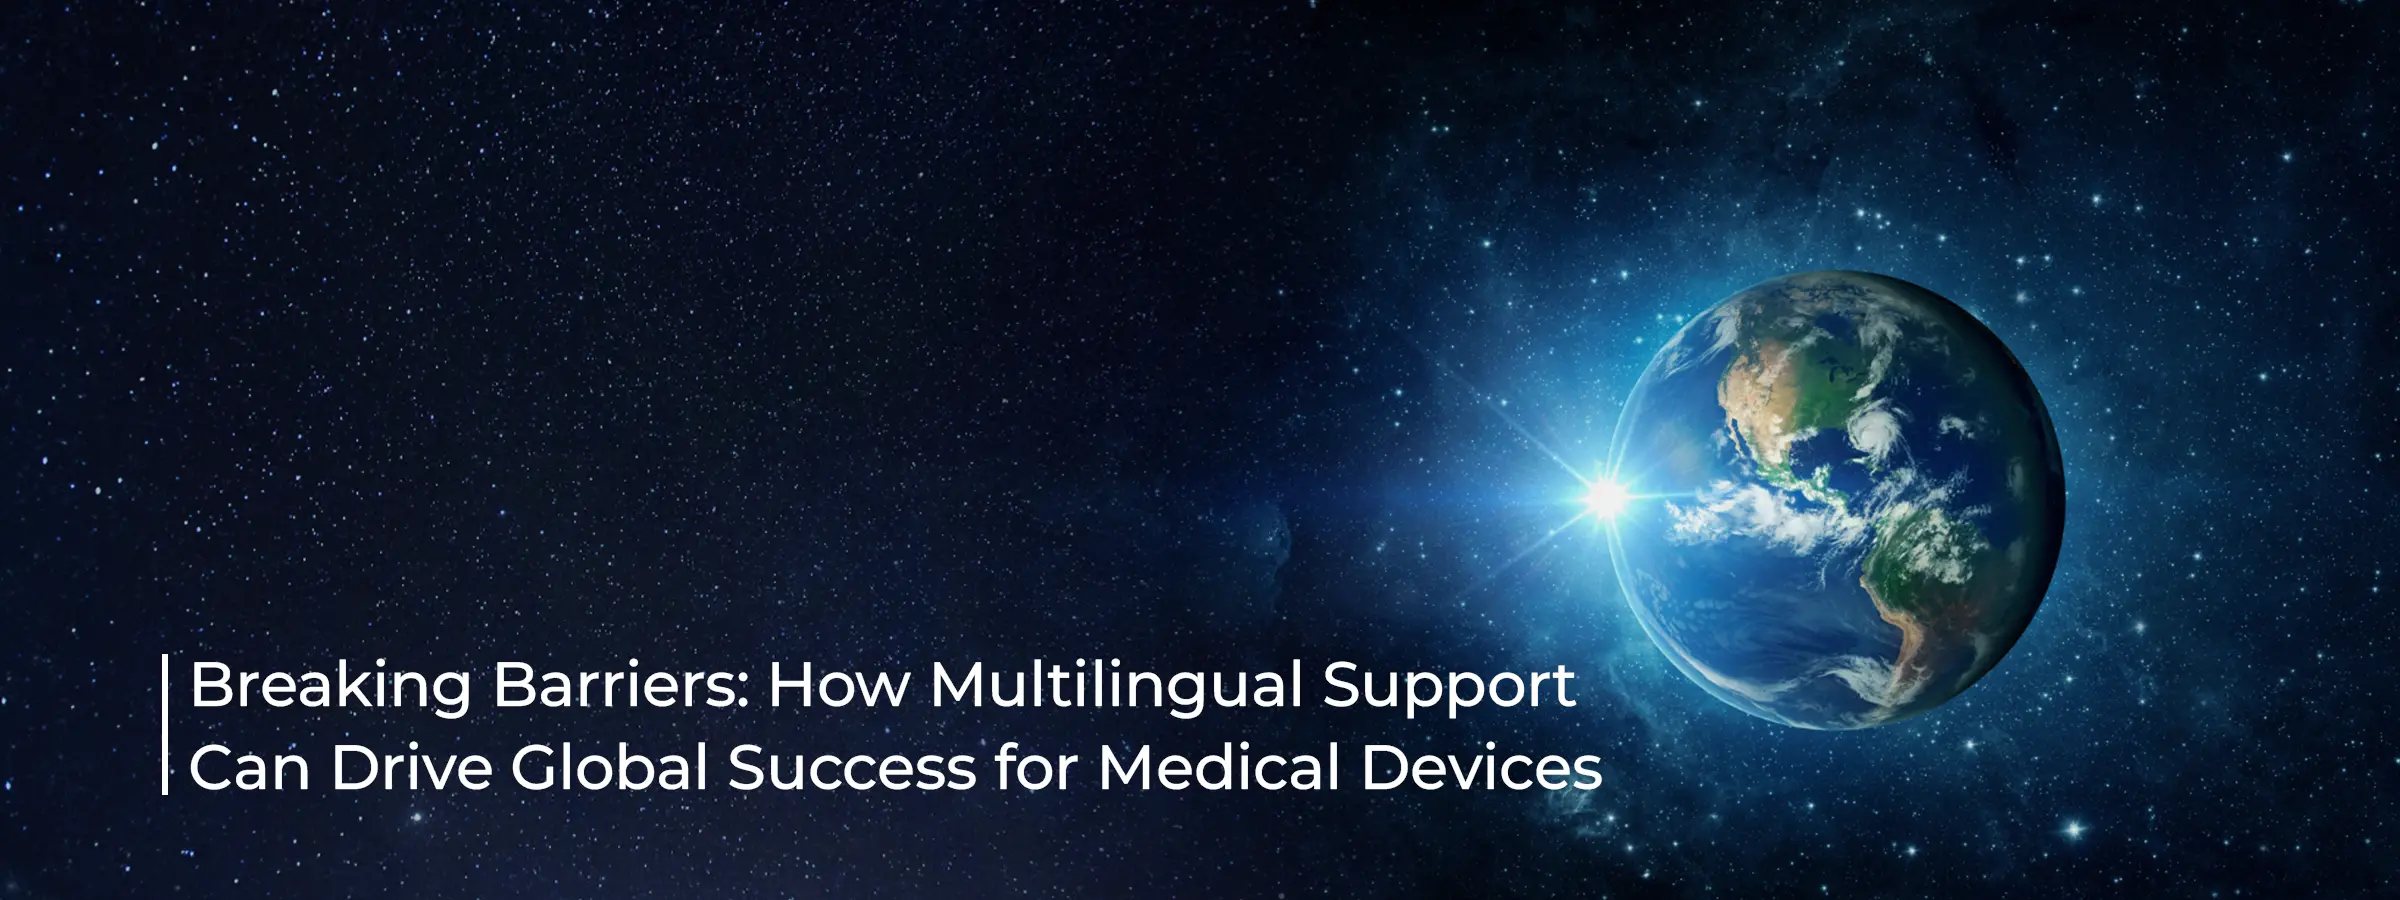 multilingual-support-can-drive-global-success-for-medical-devices